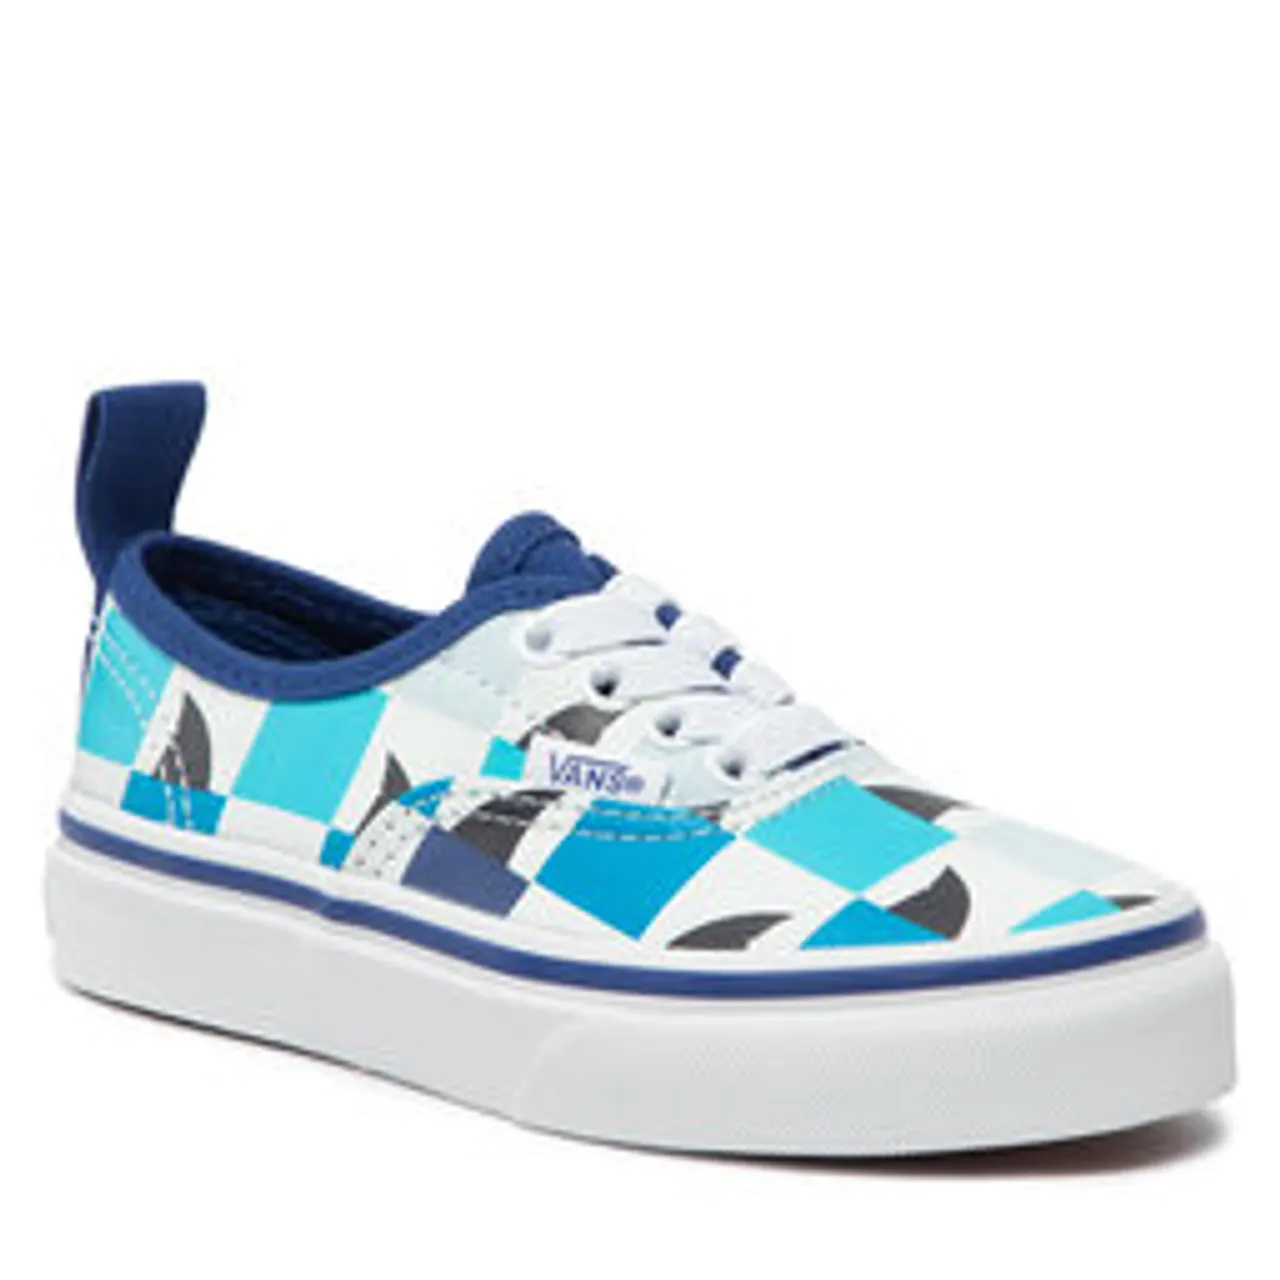 Sneakers aus Stoff Vans Authentic Elas VN0A4BUSABQ1 (Glow Checkerboard Sharks)